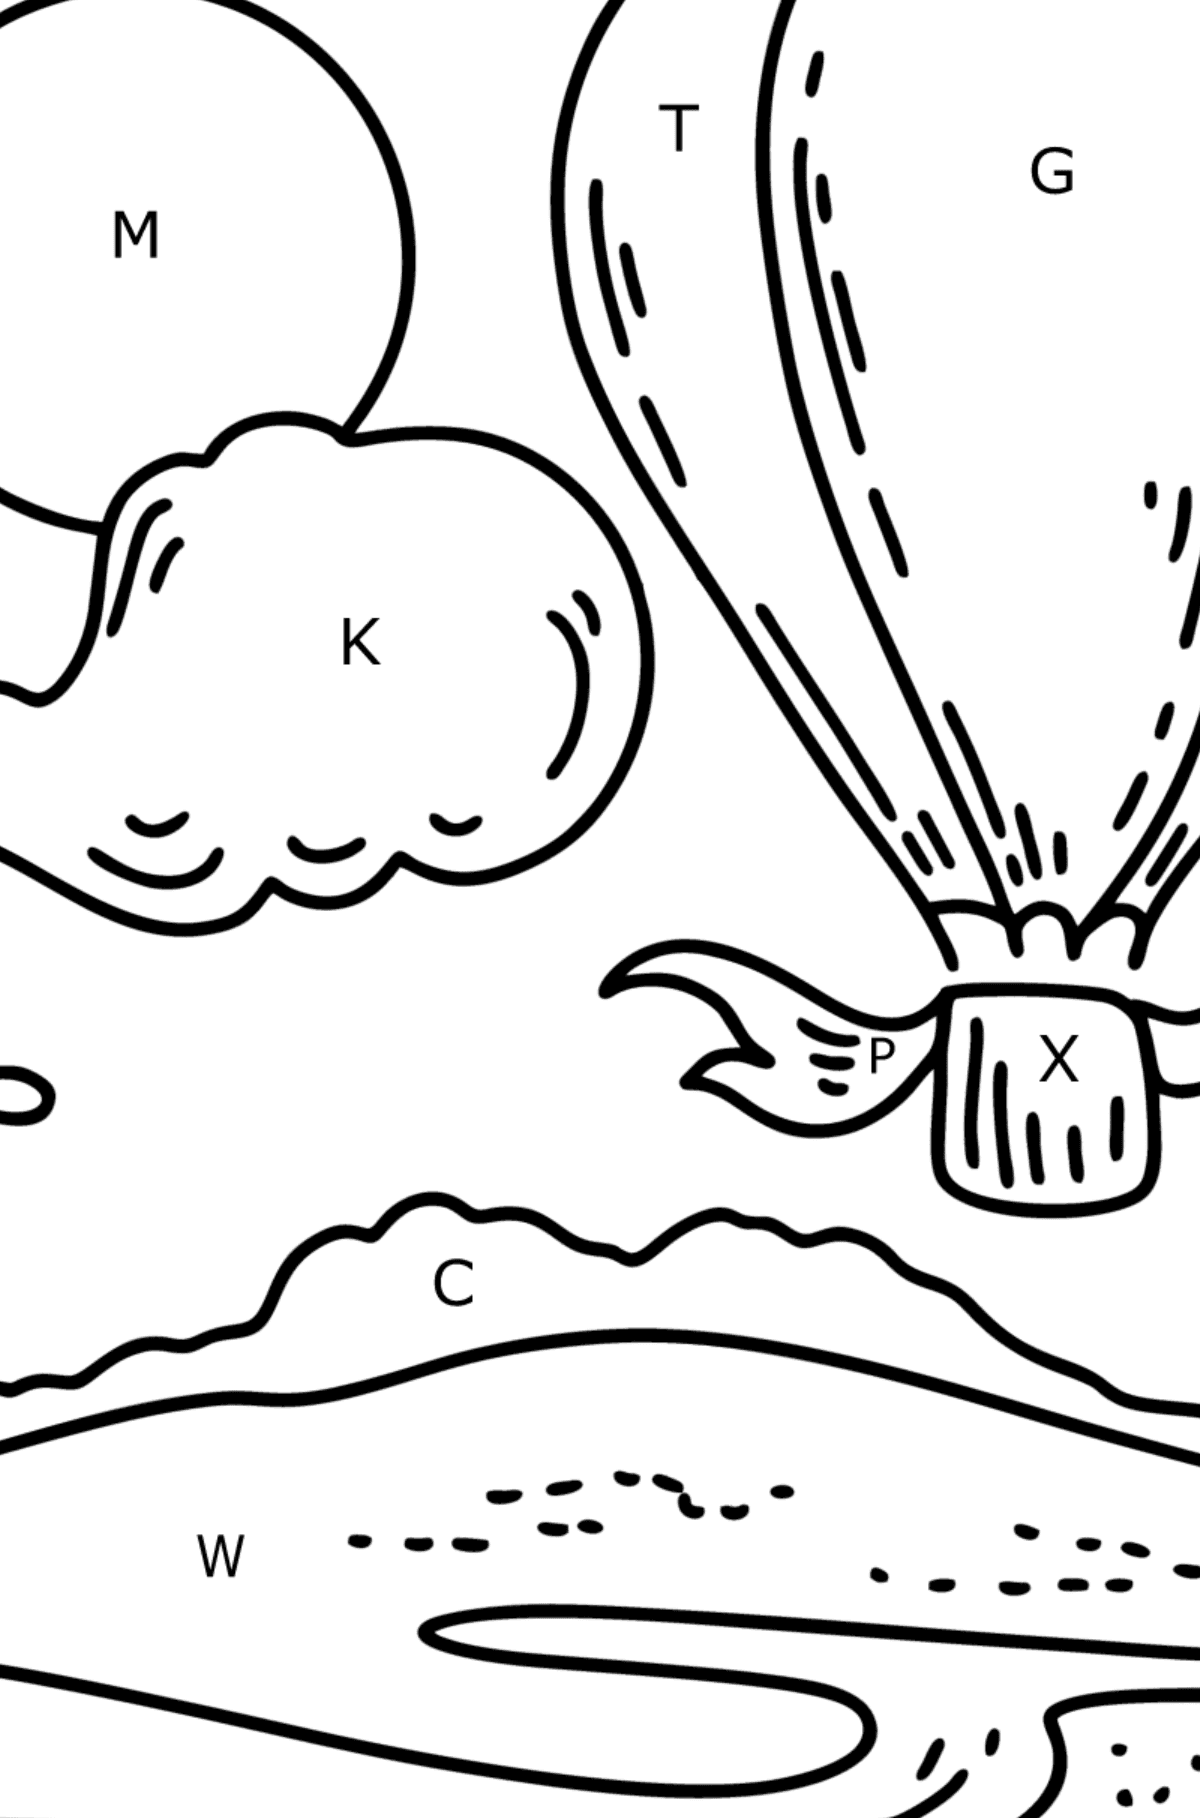 Coloring page - hot air balloon - Coloring by Letters for Kids